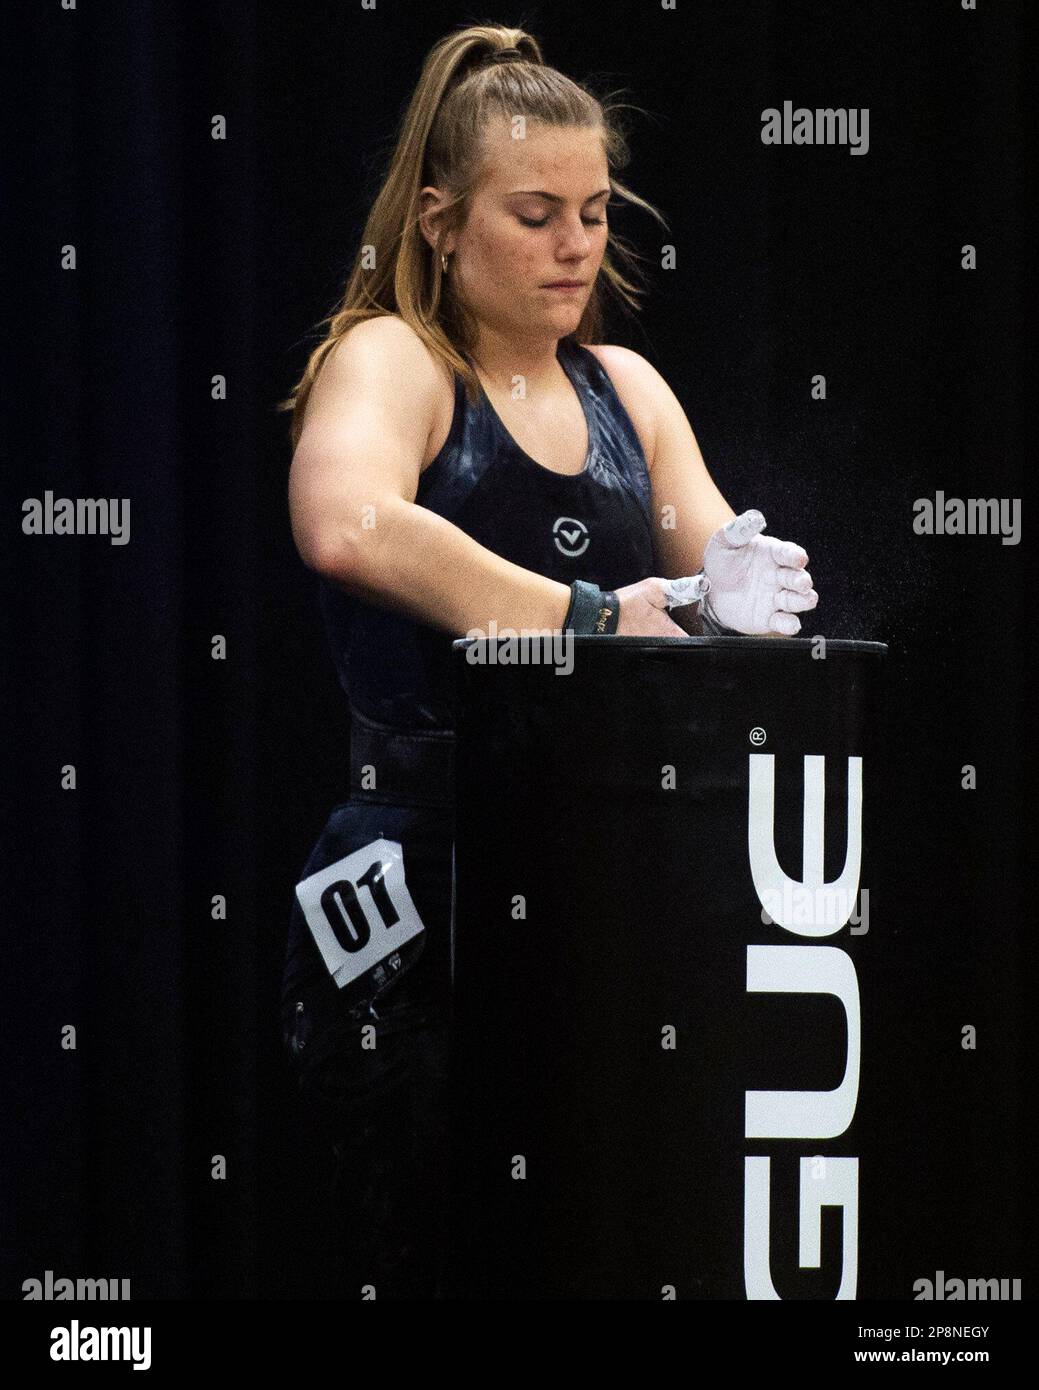 Columbus, Ohio, United States. 3th Mar, 2023. Miranda Ulrey competes in the Women's 55kg category in the clean and jerk at the Rogue Stage in Columbus, Ohio, USA. Credit: Brent Clark/Alamy Live News Stock Photo